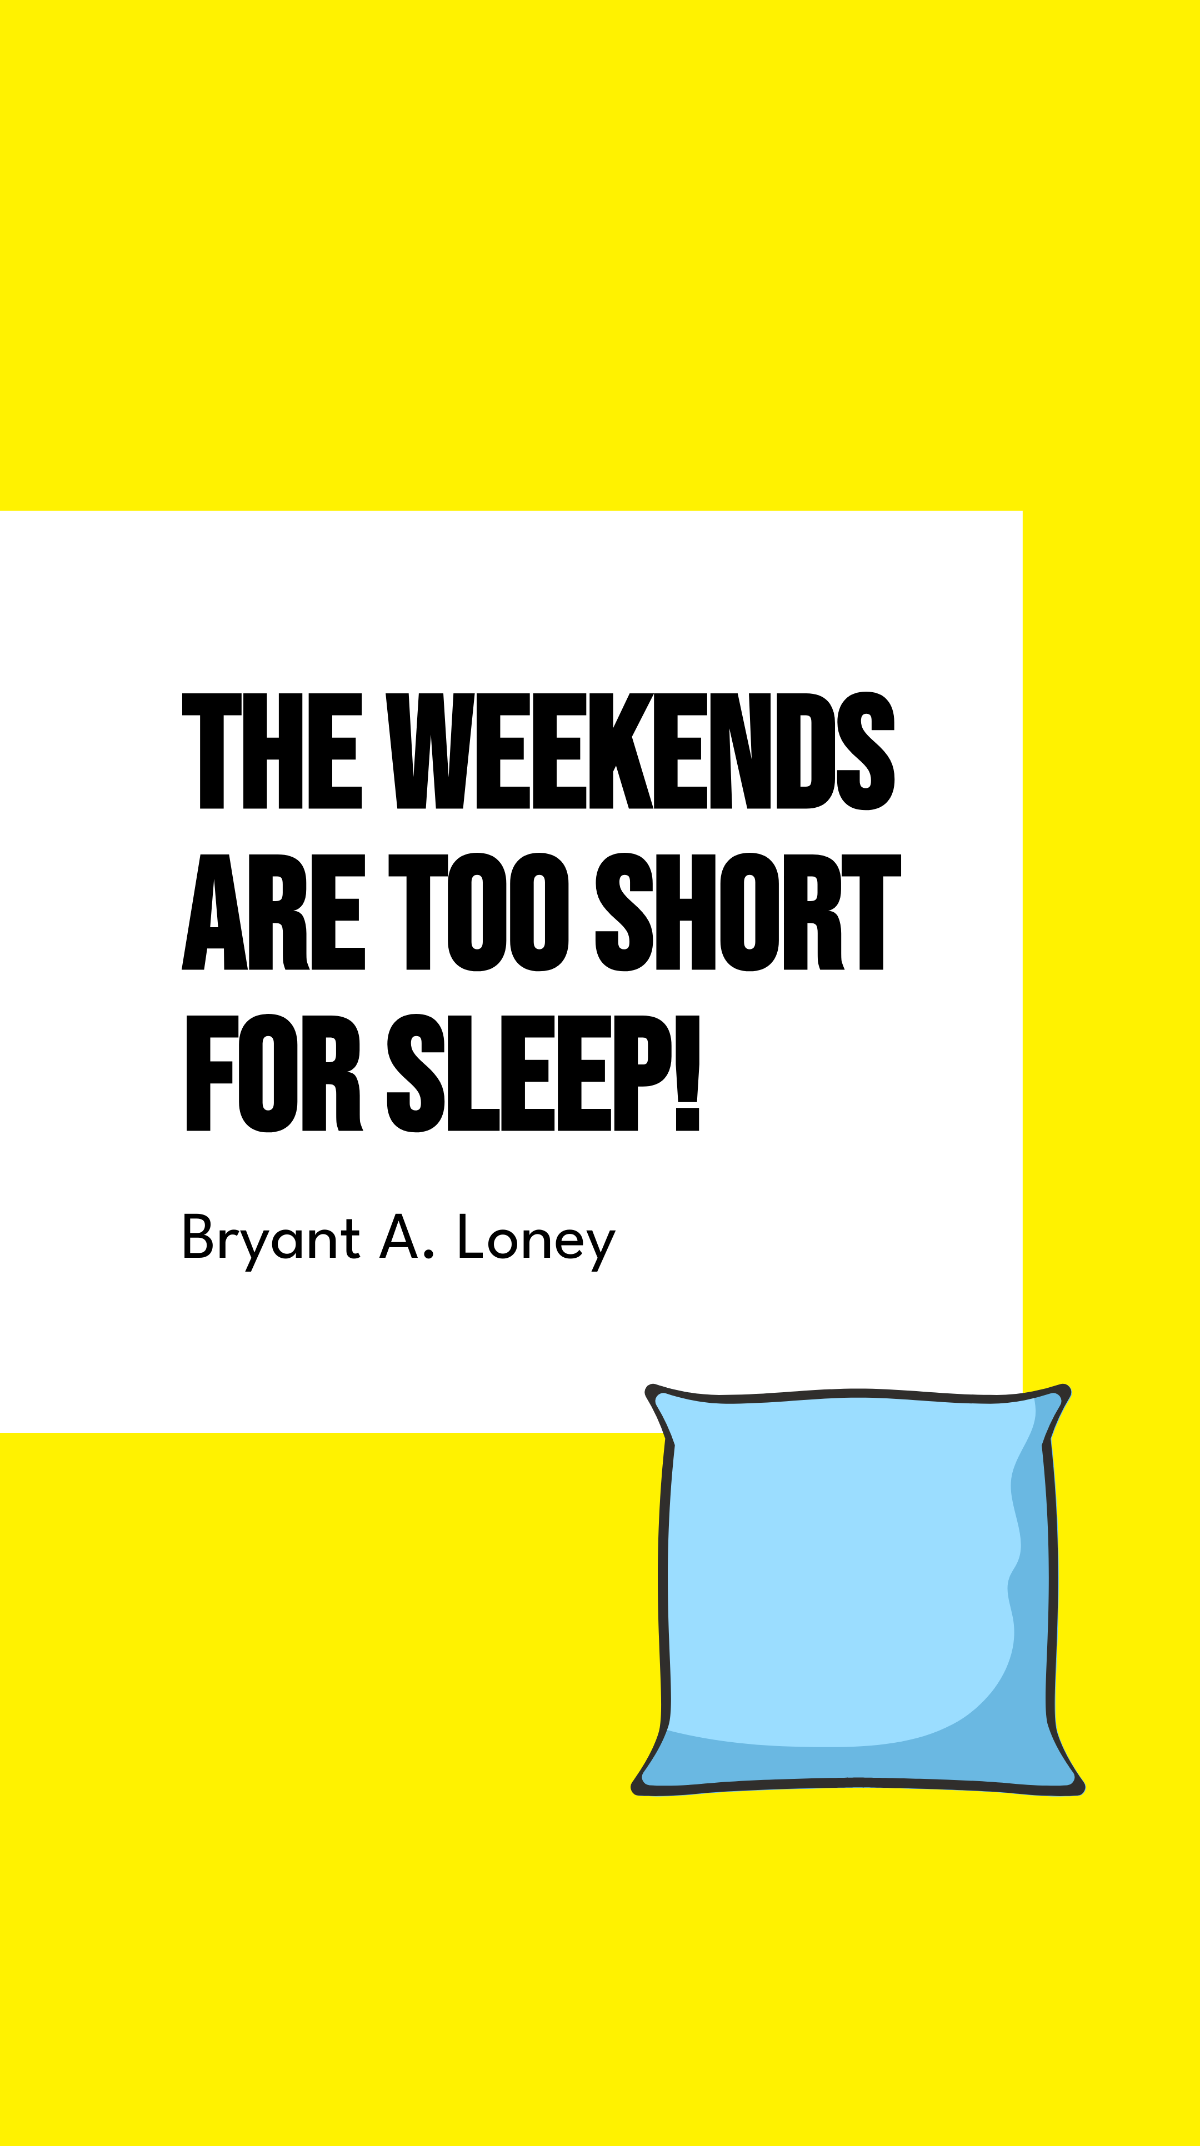 Free Bryant A. Loney - The weekends are too short for sleep!  Template